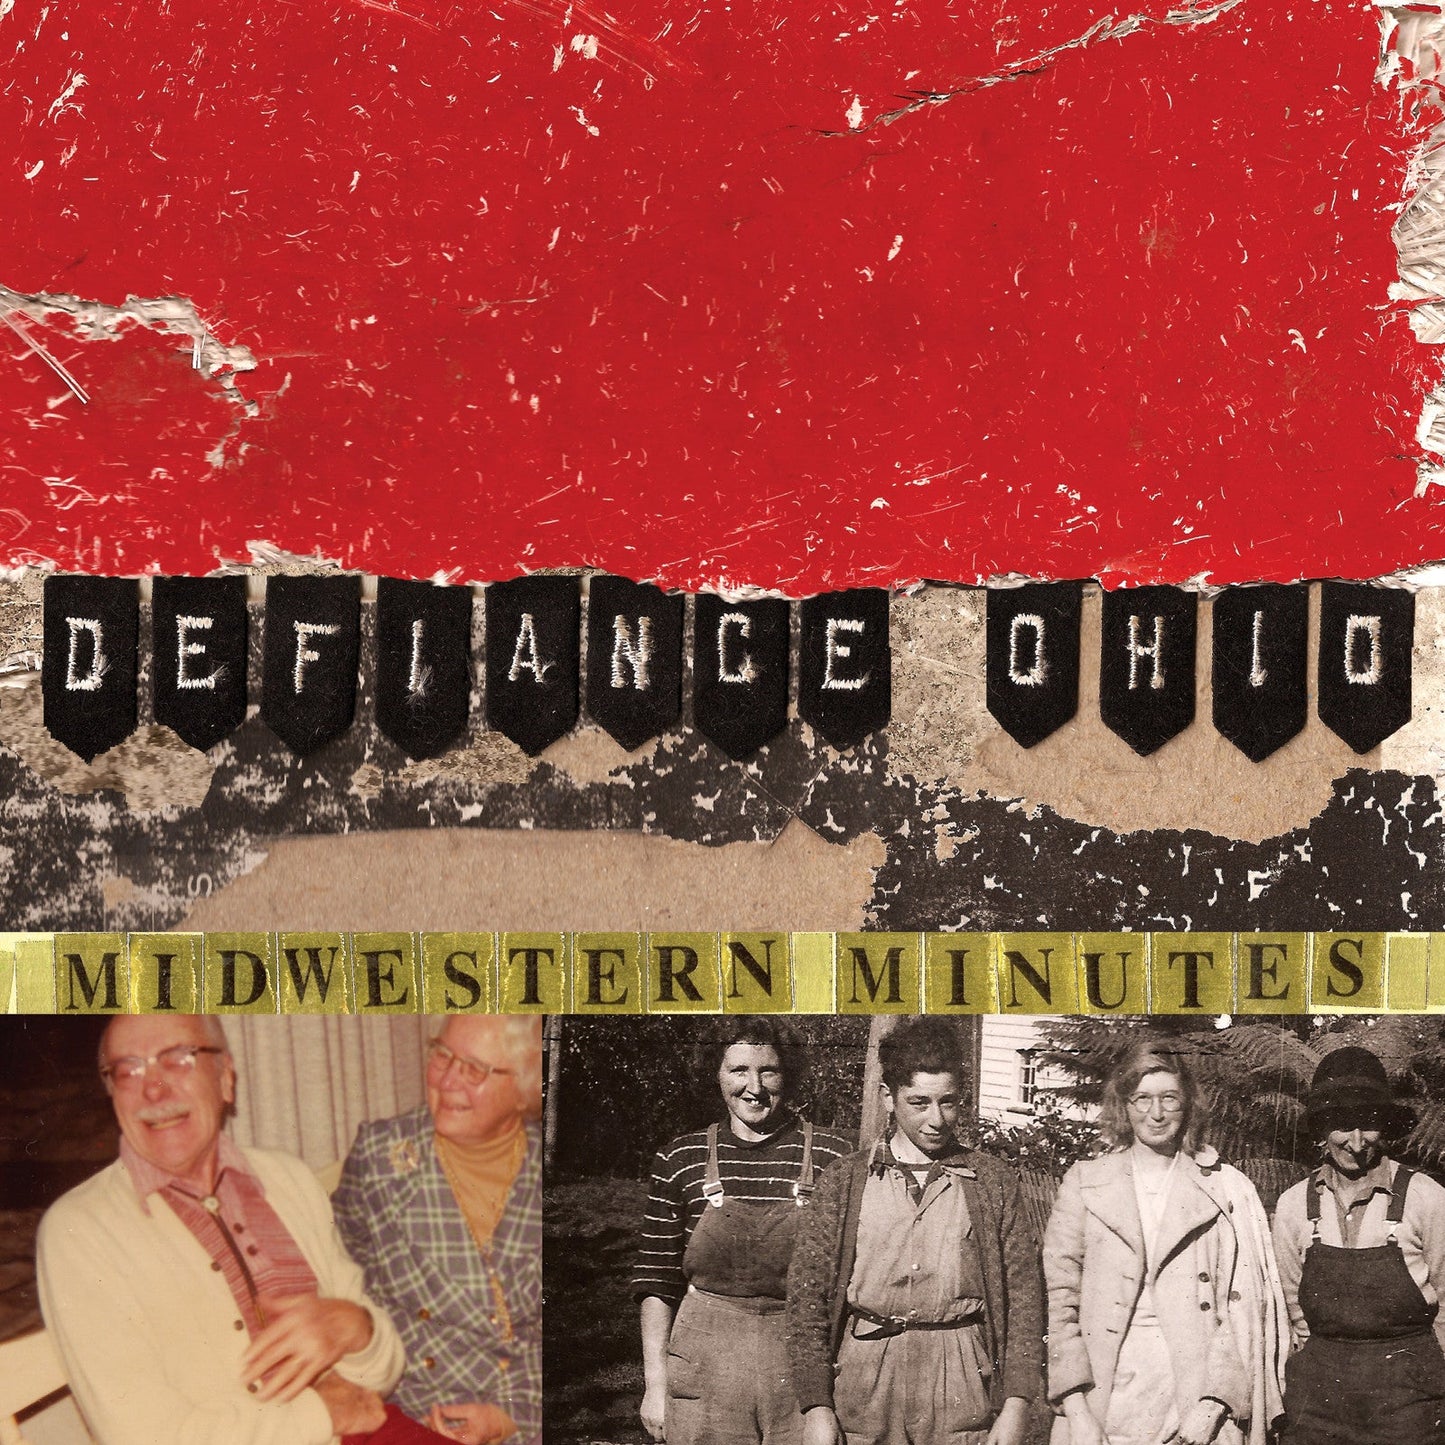 DEFIANCE, OHIO "Midwestern Minutes"